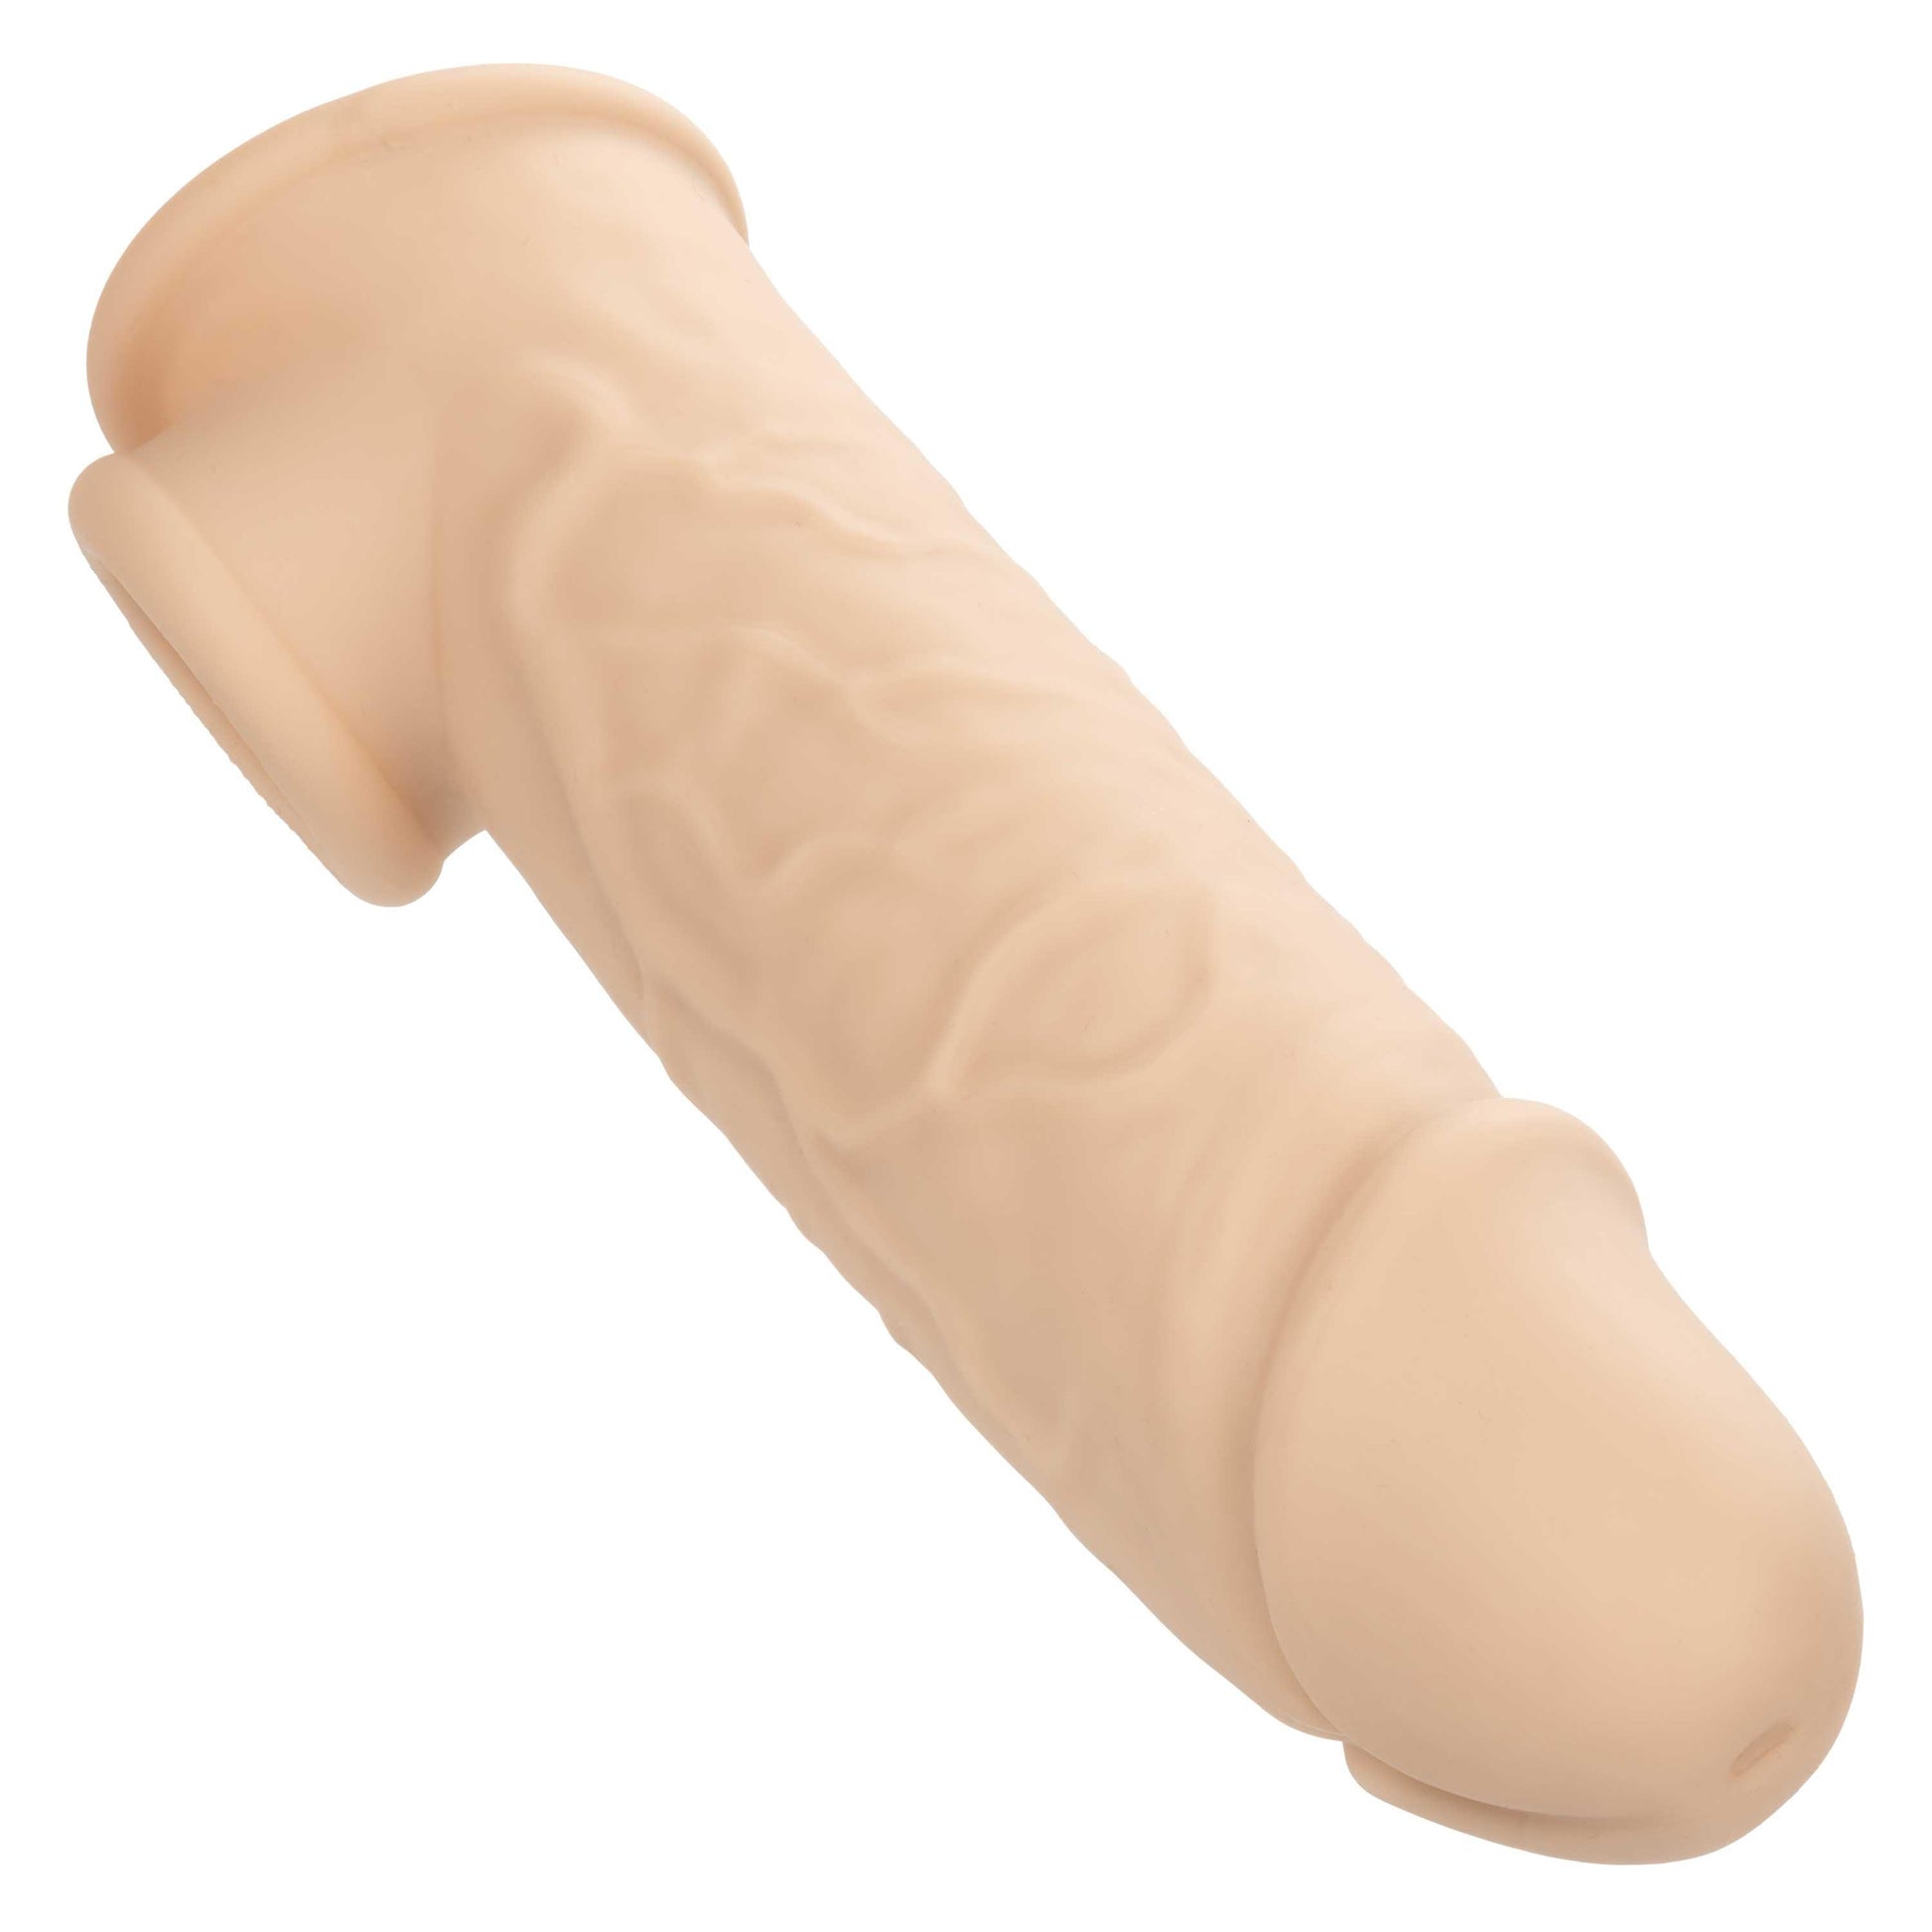 Performance Maxx Life-Like Extension 7 Inch - Ivory - My Sex Toy Hub